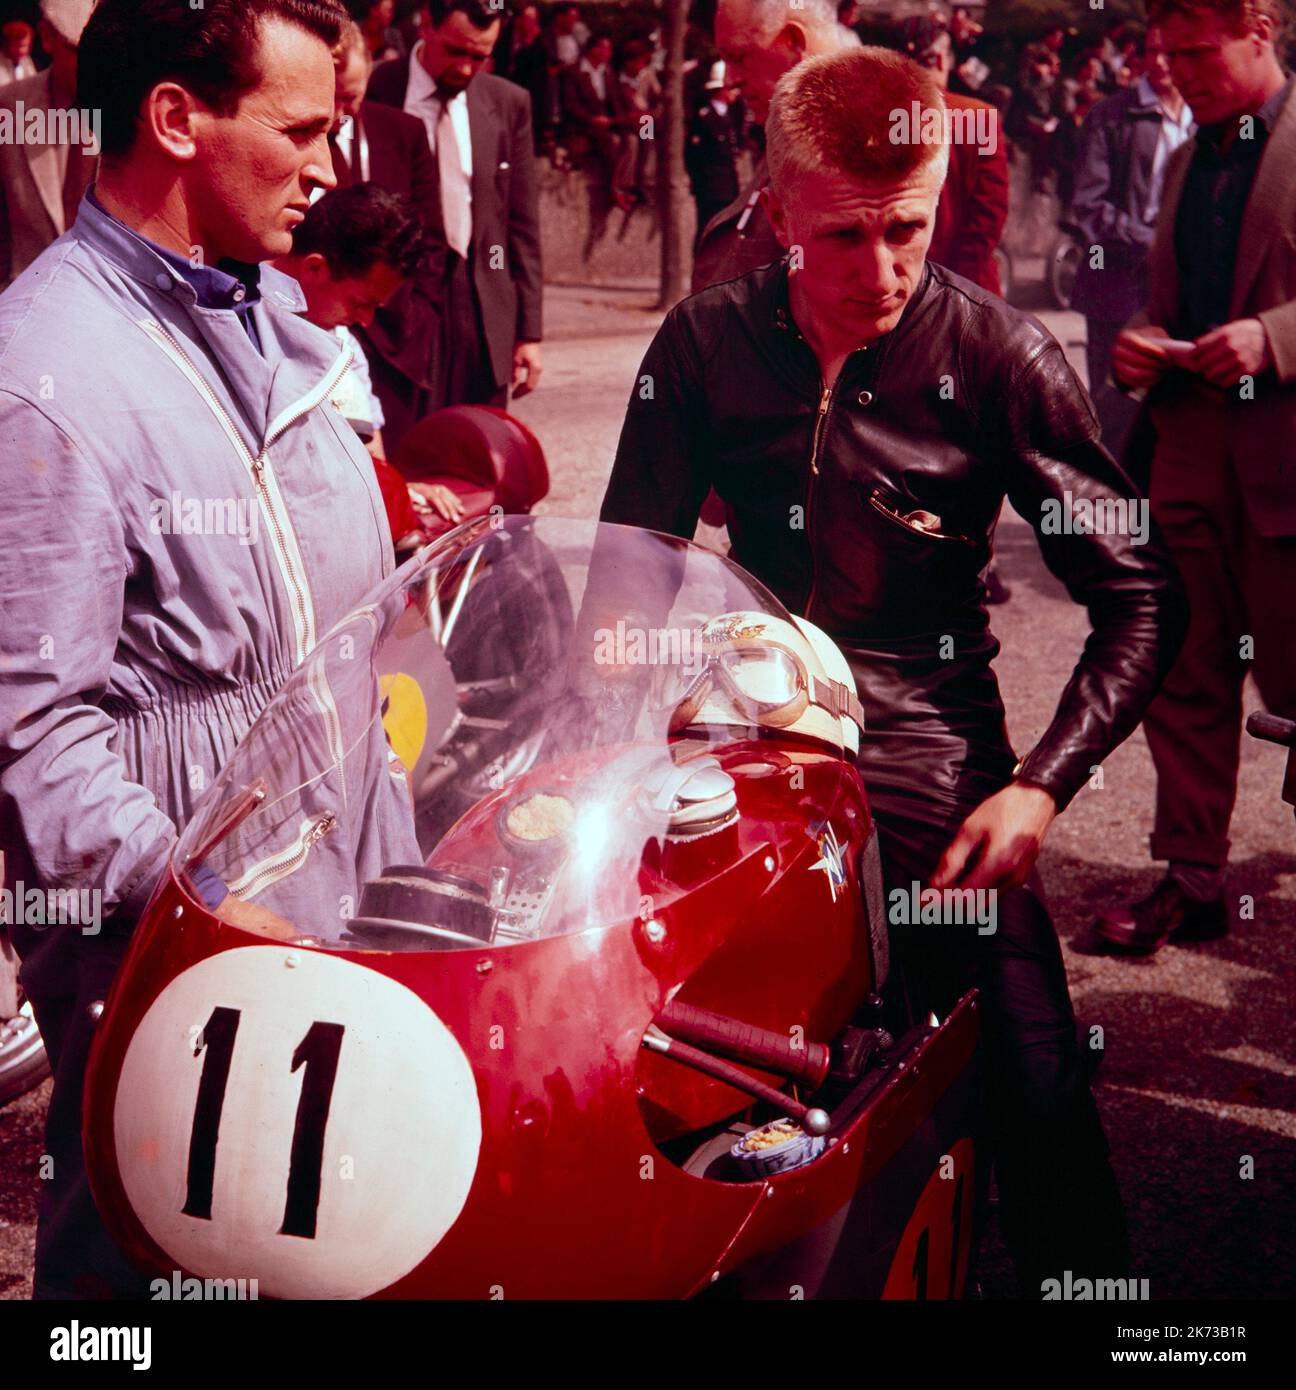 Vintage Colour Photograph showing the British Motorcycle rider John Hartle at the 1960 Isle of Man TT Race with an MV Agusta Motor Bike. Stock Photo